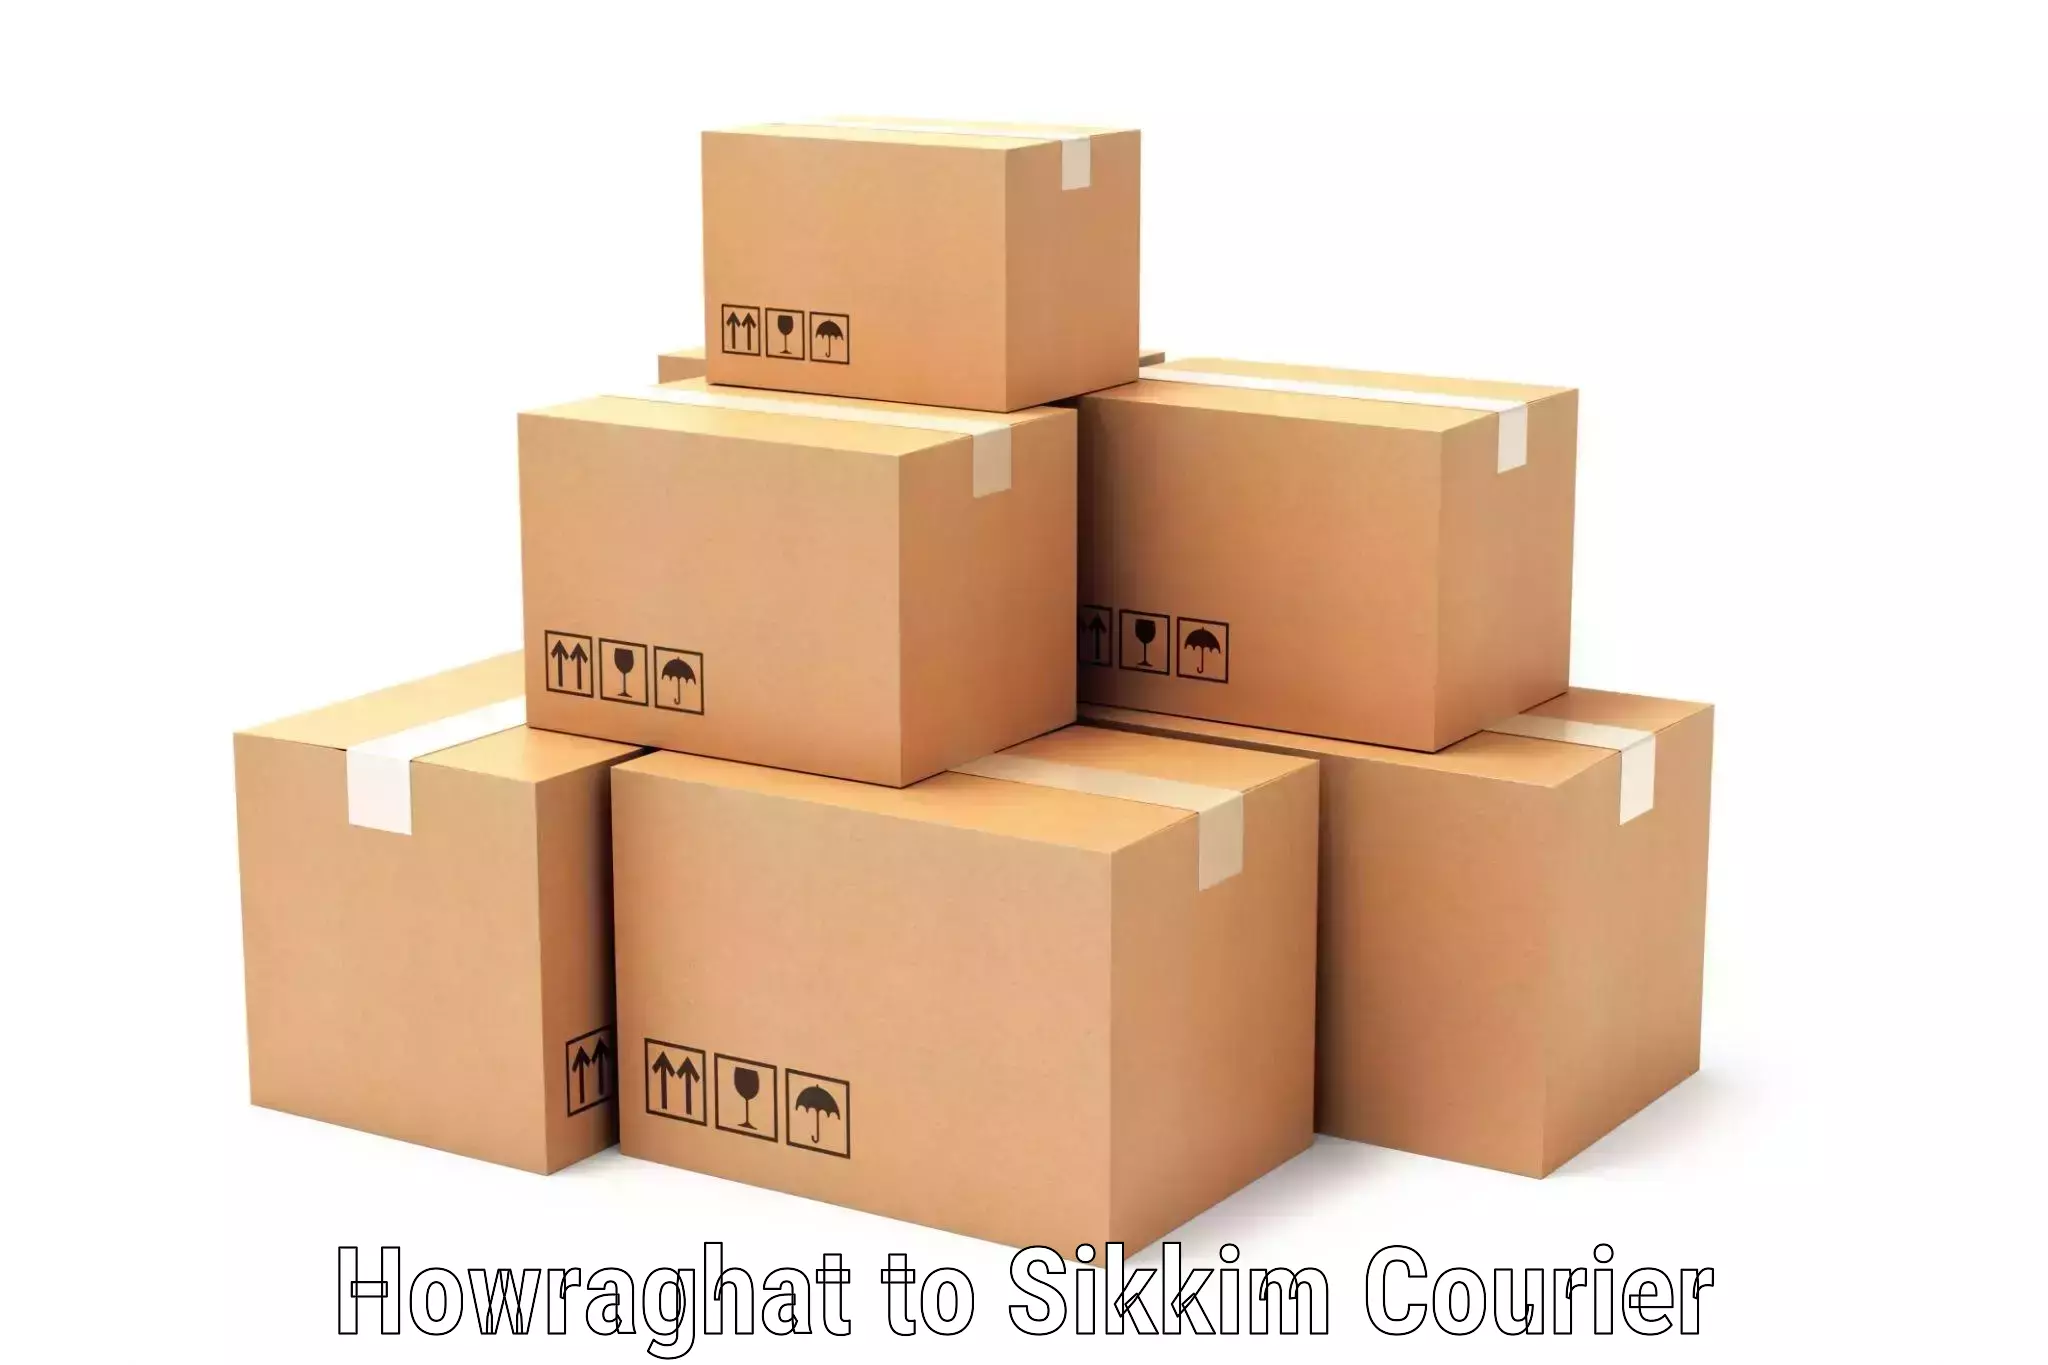 Cost-effective courier solutions Howraghat to West Sikkim